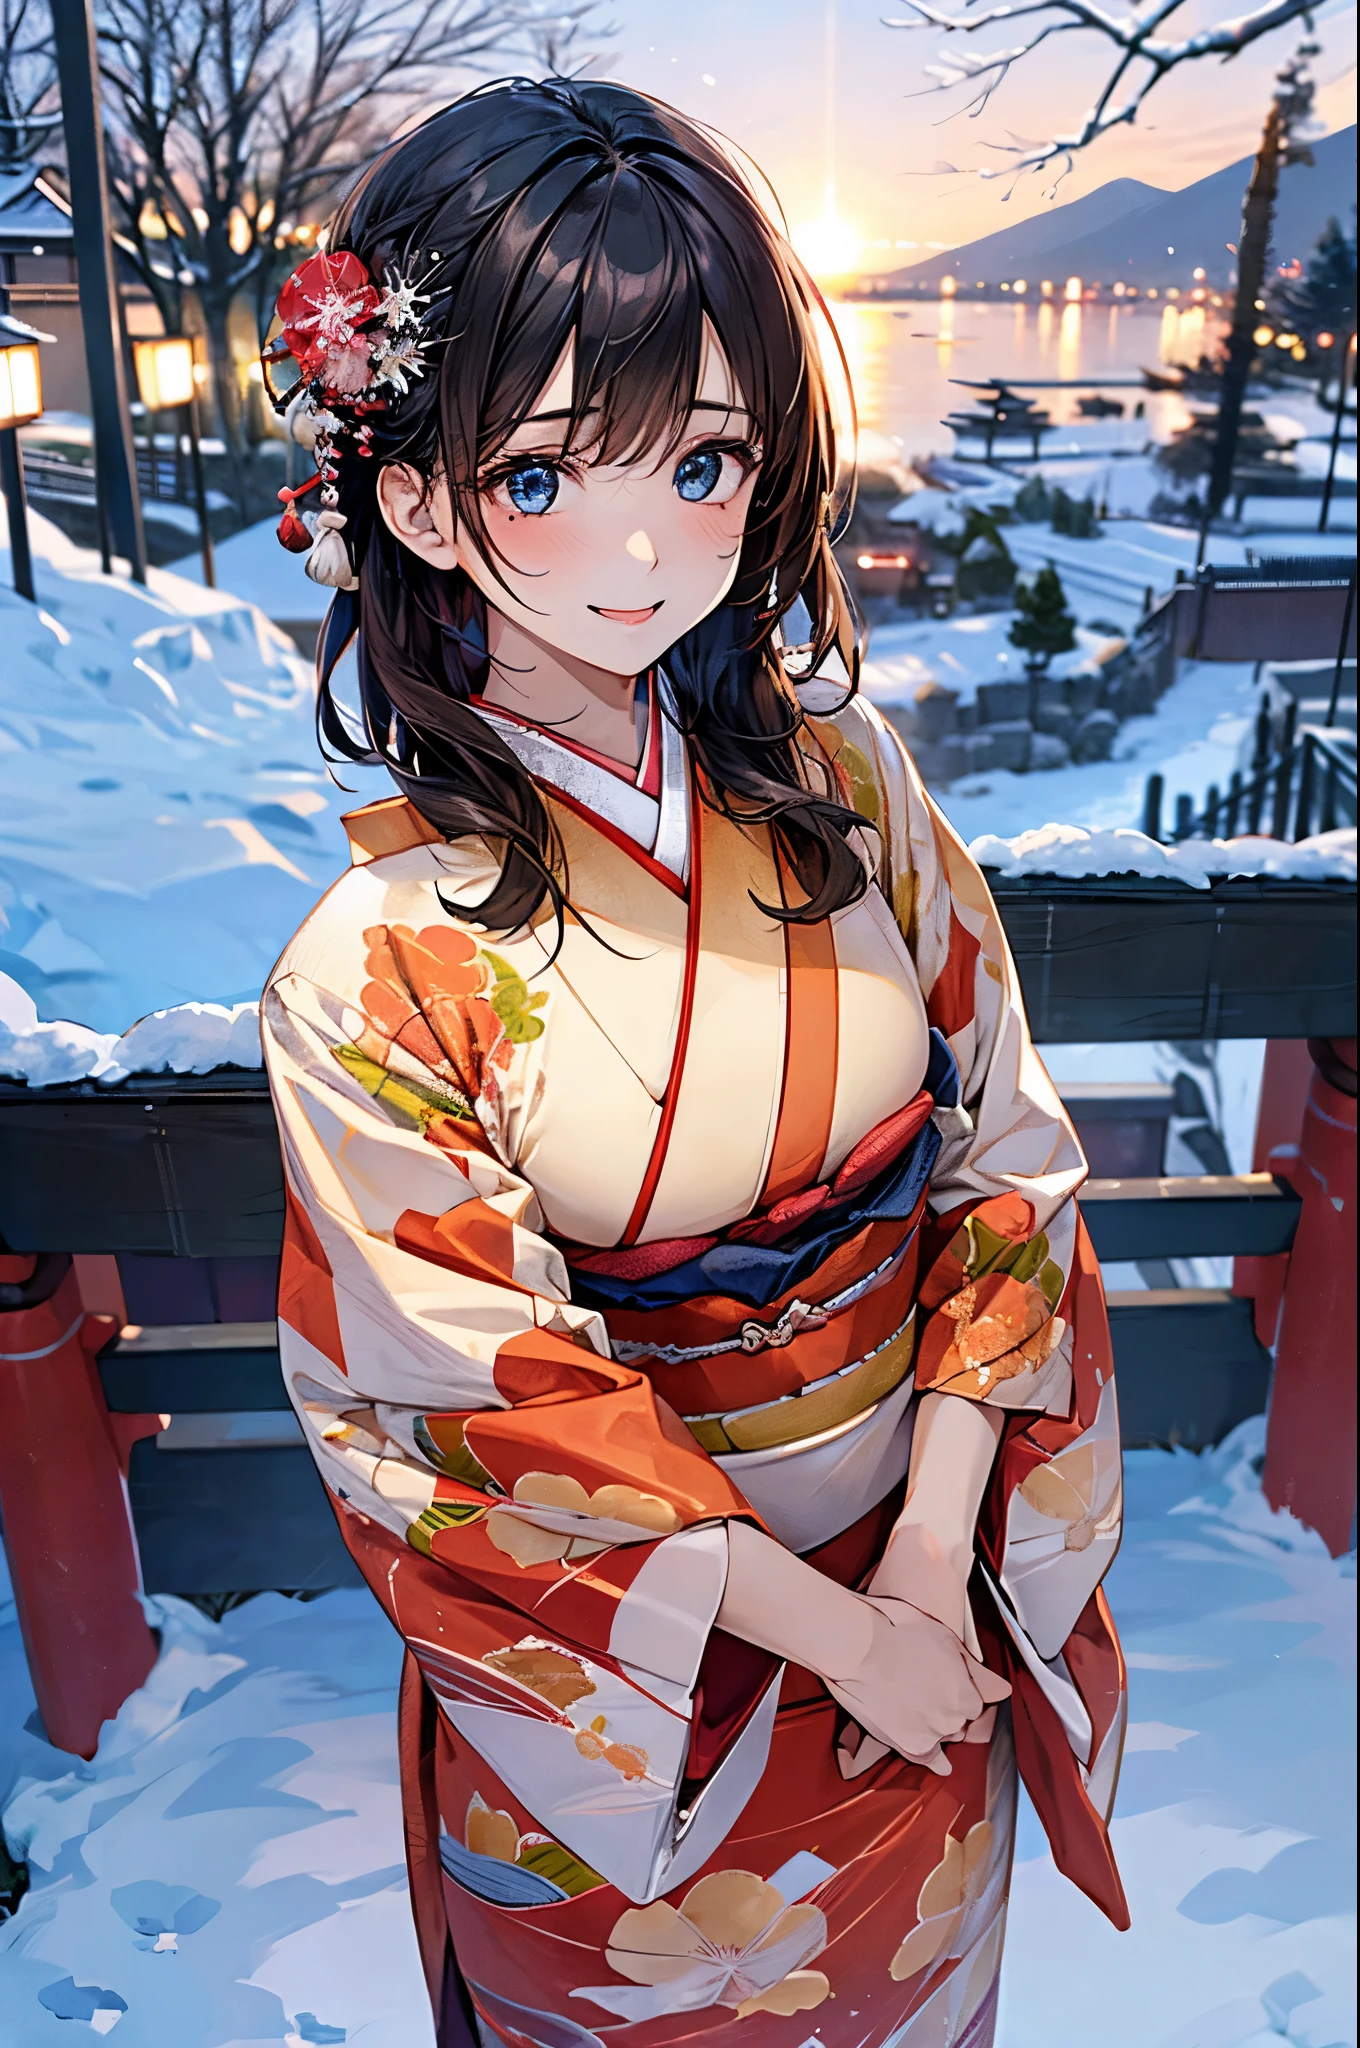 ((perfect anatomy, anatomically correct, super detailed skin)), 
1 girl, japanese, high school girl, shiny skin, large breasts:0.5, looking up, watching the view, 
beautiful hair, beautiful face, beautiful detailed eyes, (middle hair:1.5, japanese hair:1.5), black hair, blue eyes, babyface, mole under eye, 
((red floral kimono, hair ornament)), 
((smile:1.5, open your mouth wide)), walking, 
(beautiful scenery), winter, dawn, (new year's day, first visit), hokkaido, sapporo, outside hokkaido shrine, crowd, snow, snowfall:1.5, freezing weather, frost, 
(8k, top-quality, masterpiece​:1.2, extremely detailed), (photorealistic), beautiful illustration, natural lighting,